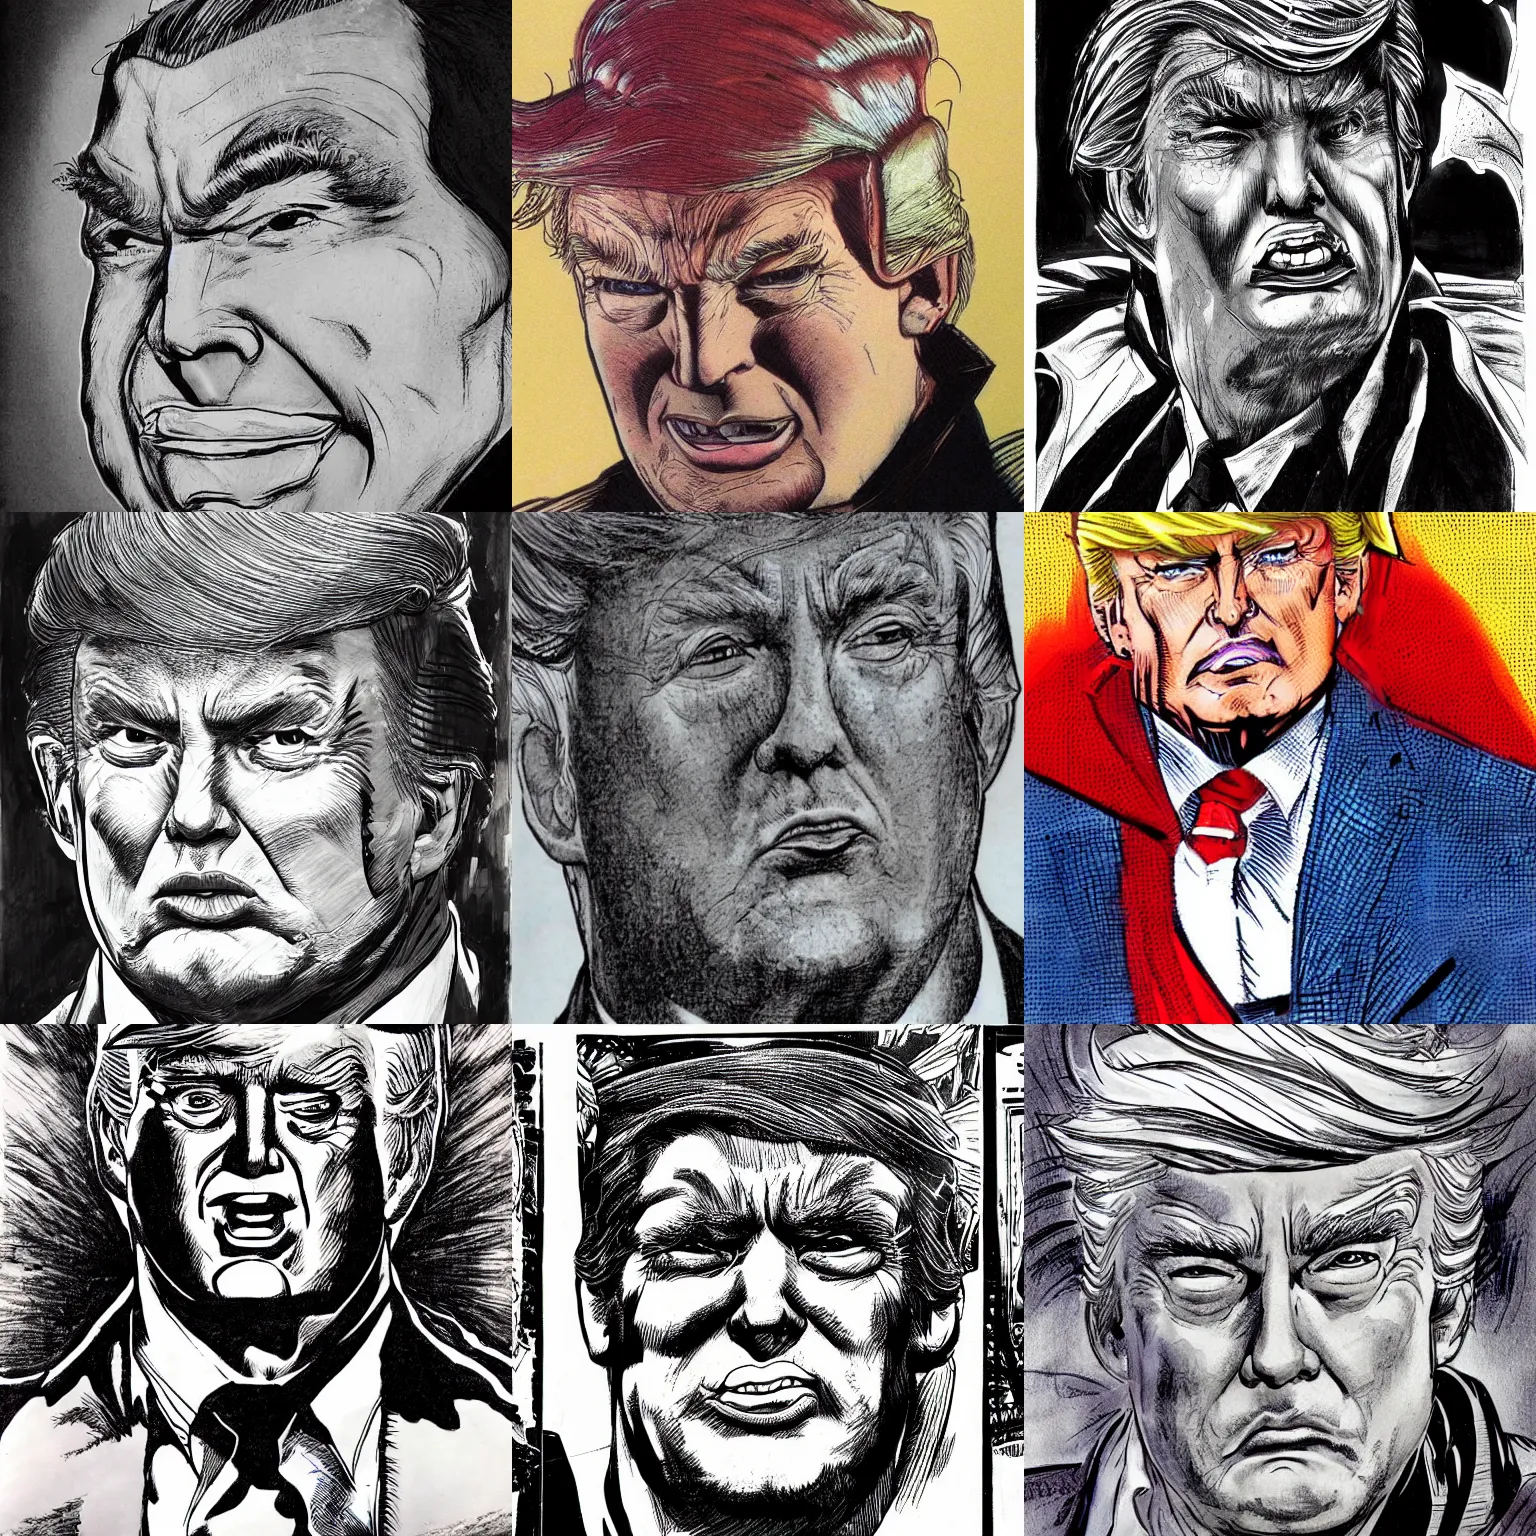 Prompt: jim lee!!! close up headshot of donald trump as superhero in the style of jim lee, comic book ink drawing by jim lee